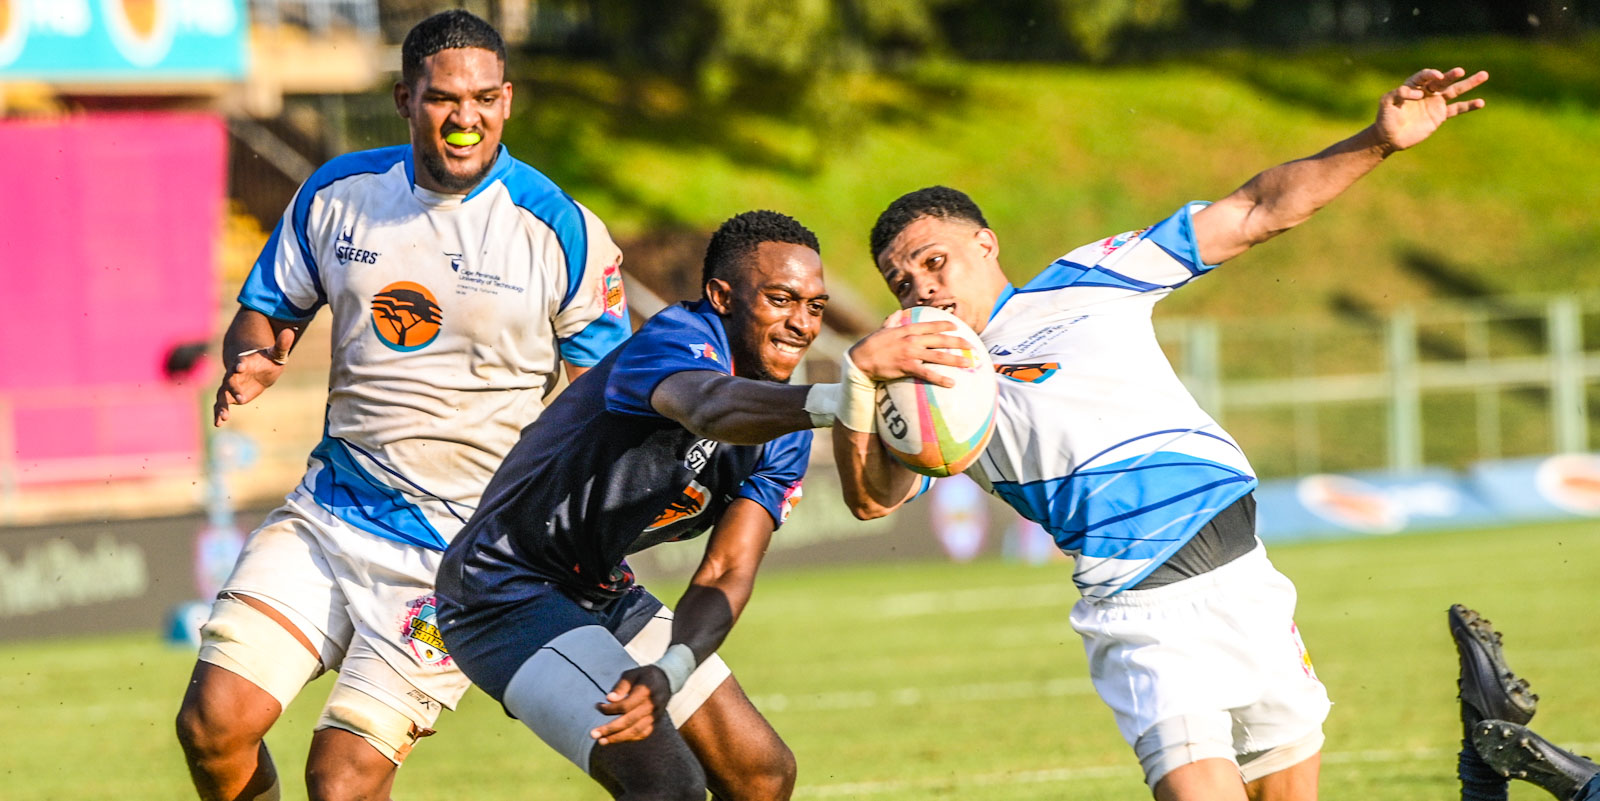 DUT had no answer for the attacking prowess of CPUT as they conceded another century of points.